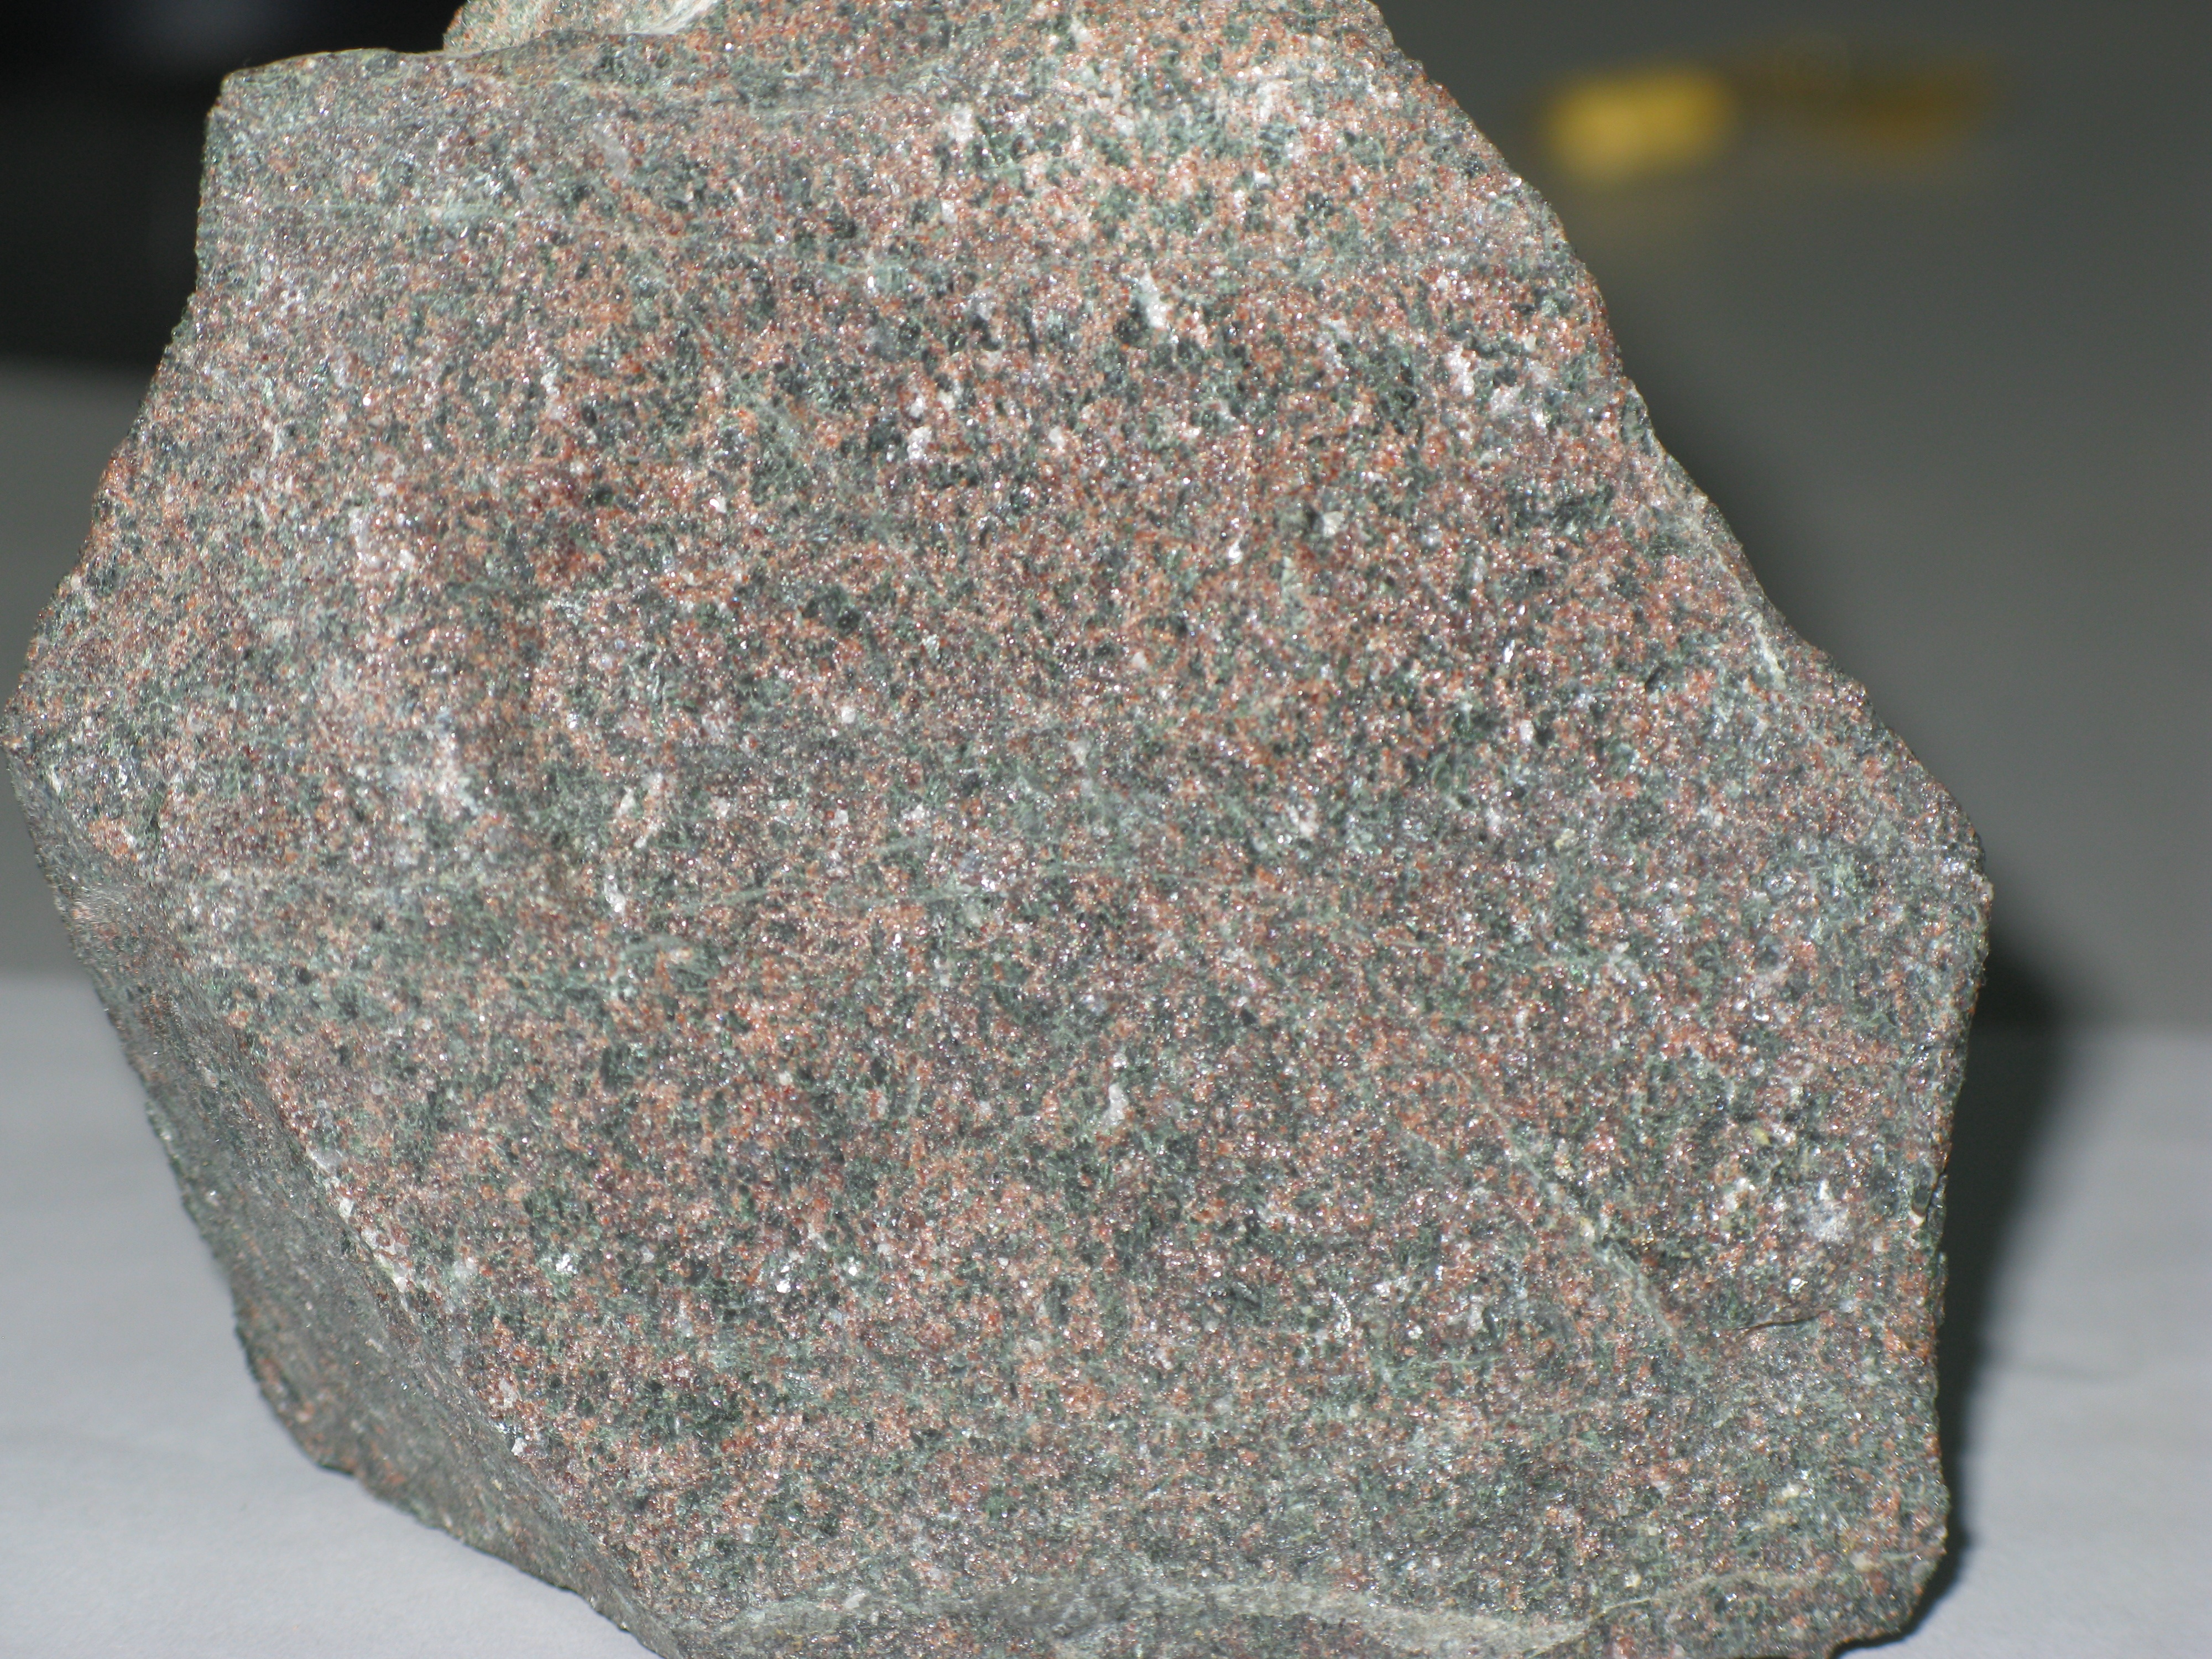 Magnesium isotopes found in this eclogite from the Davie Mountains of China provide information as to the temperature at which the rock formed millions of years ago. The grains are garnets and the green ones are omphacites.